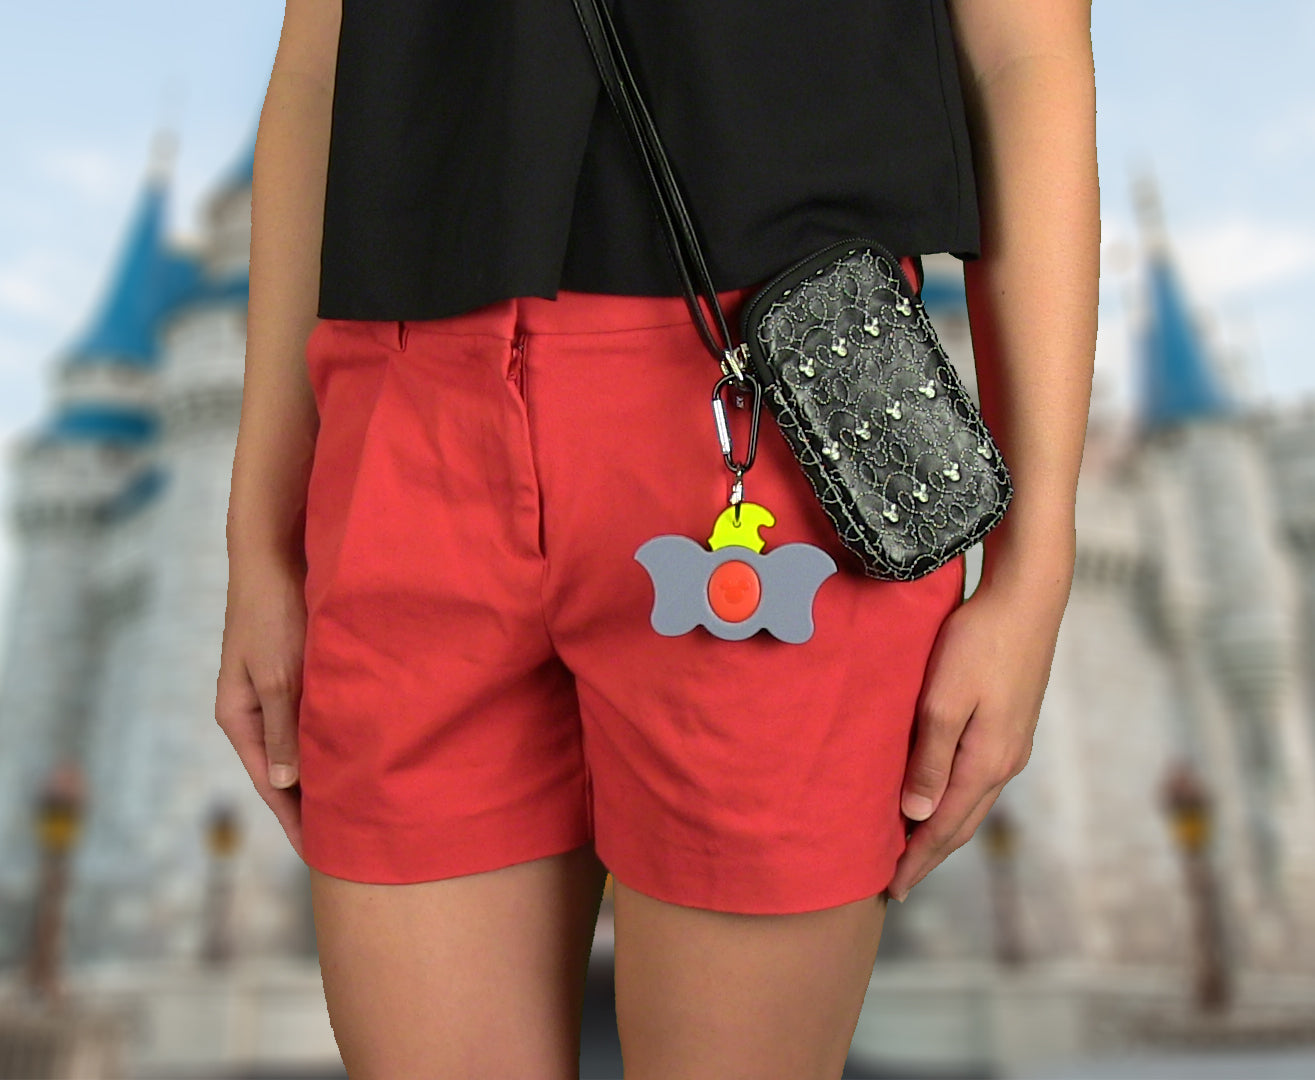 Girl using Dumbo Magic Band Buddy with a carabiner clipped to a pouch / purse